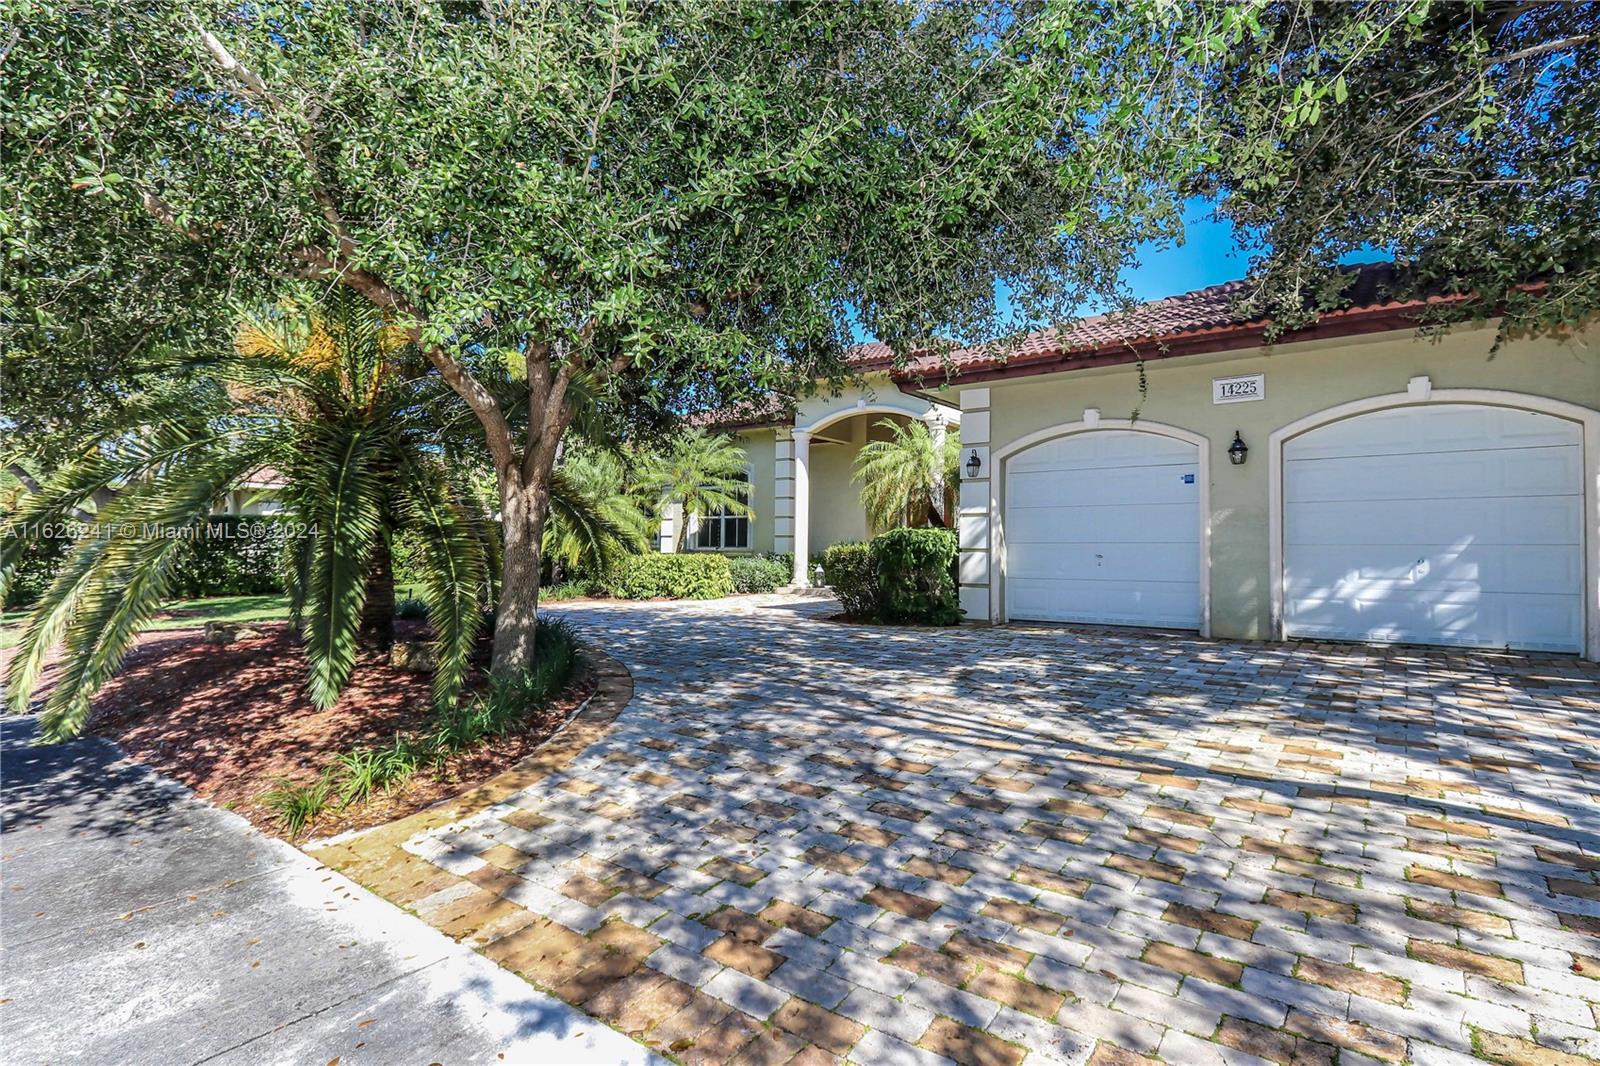 Remarkable single family home, gorgeous design, excellent features all over the house, 5 bedrooms & 5 bathrooms, marble floors throughout, private pool, 2 car garage, very private patio perfect for entertaining. Great location and neighborhood.